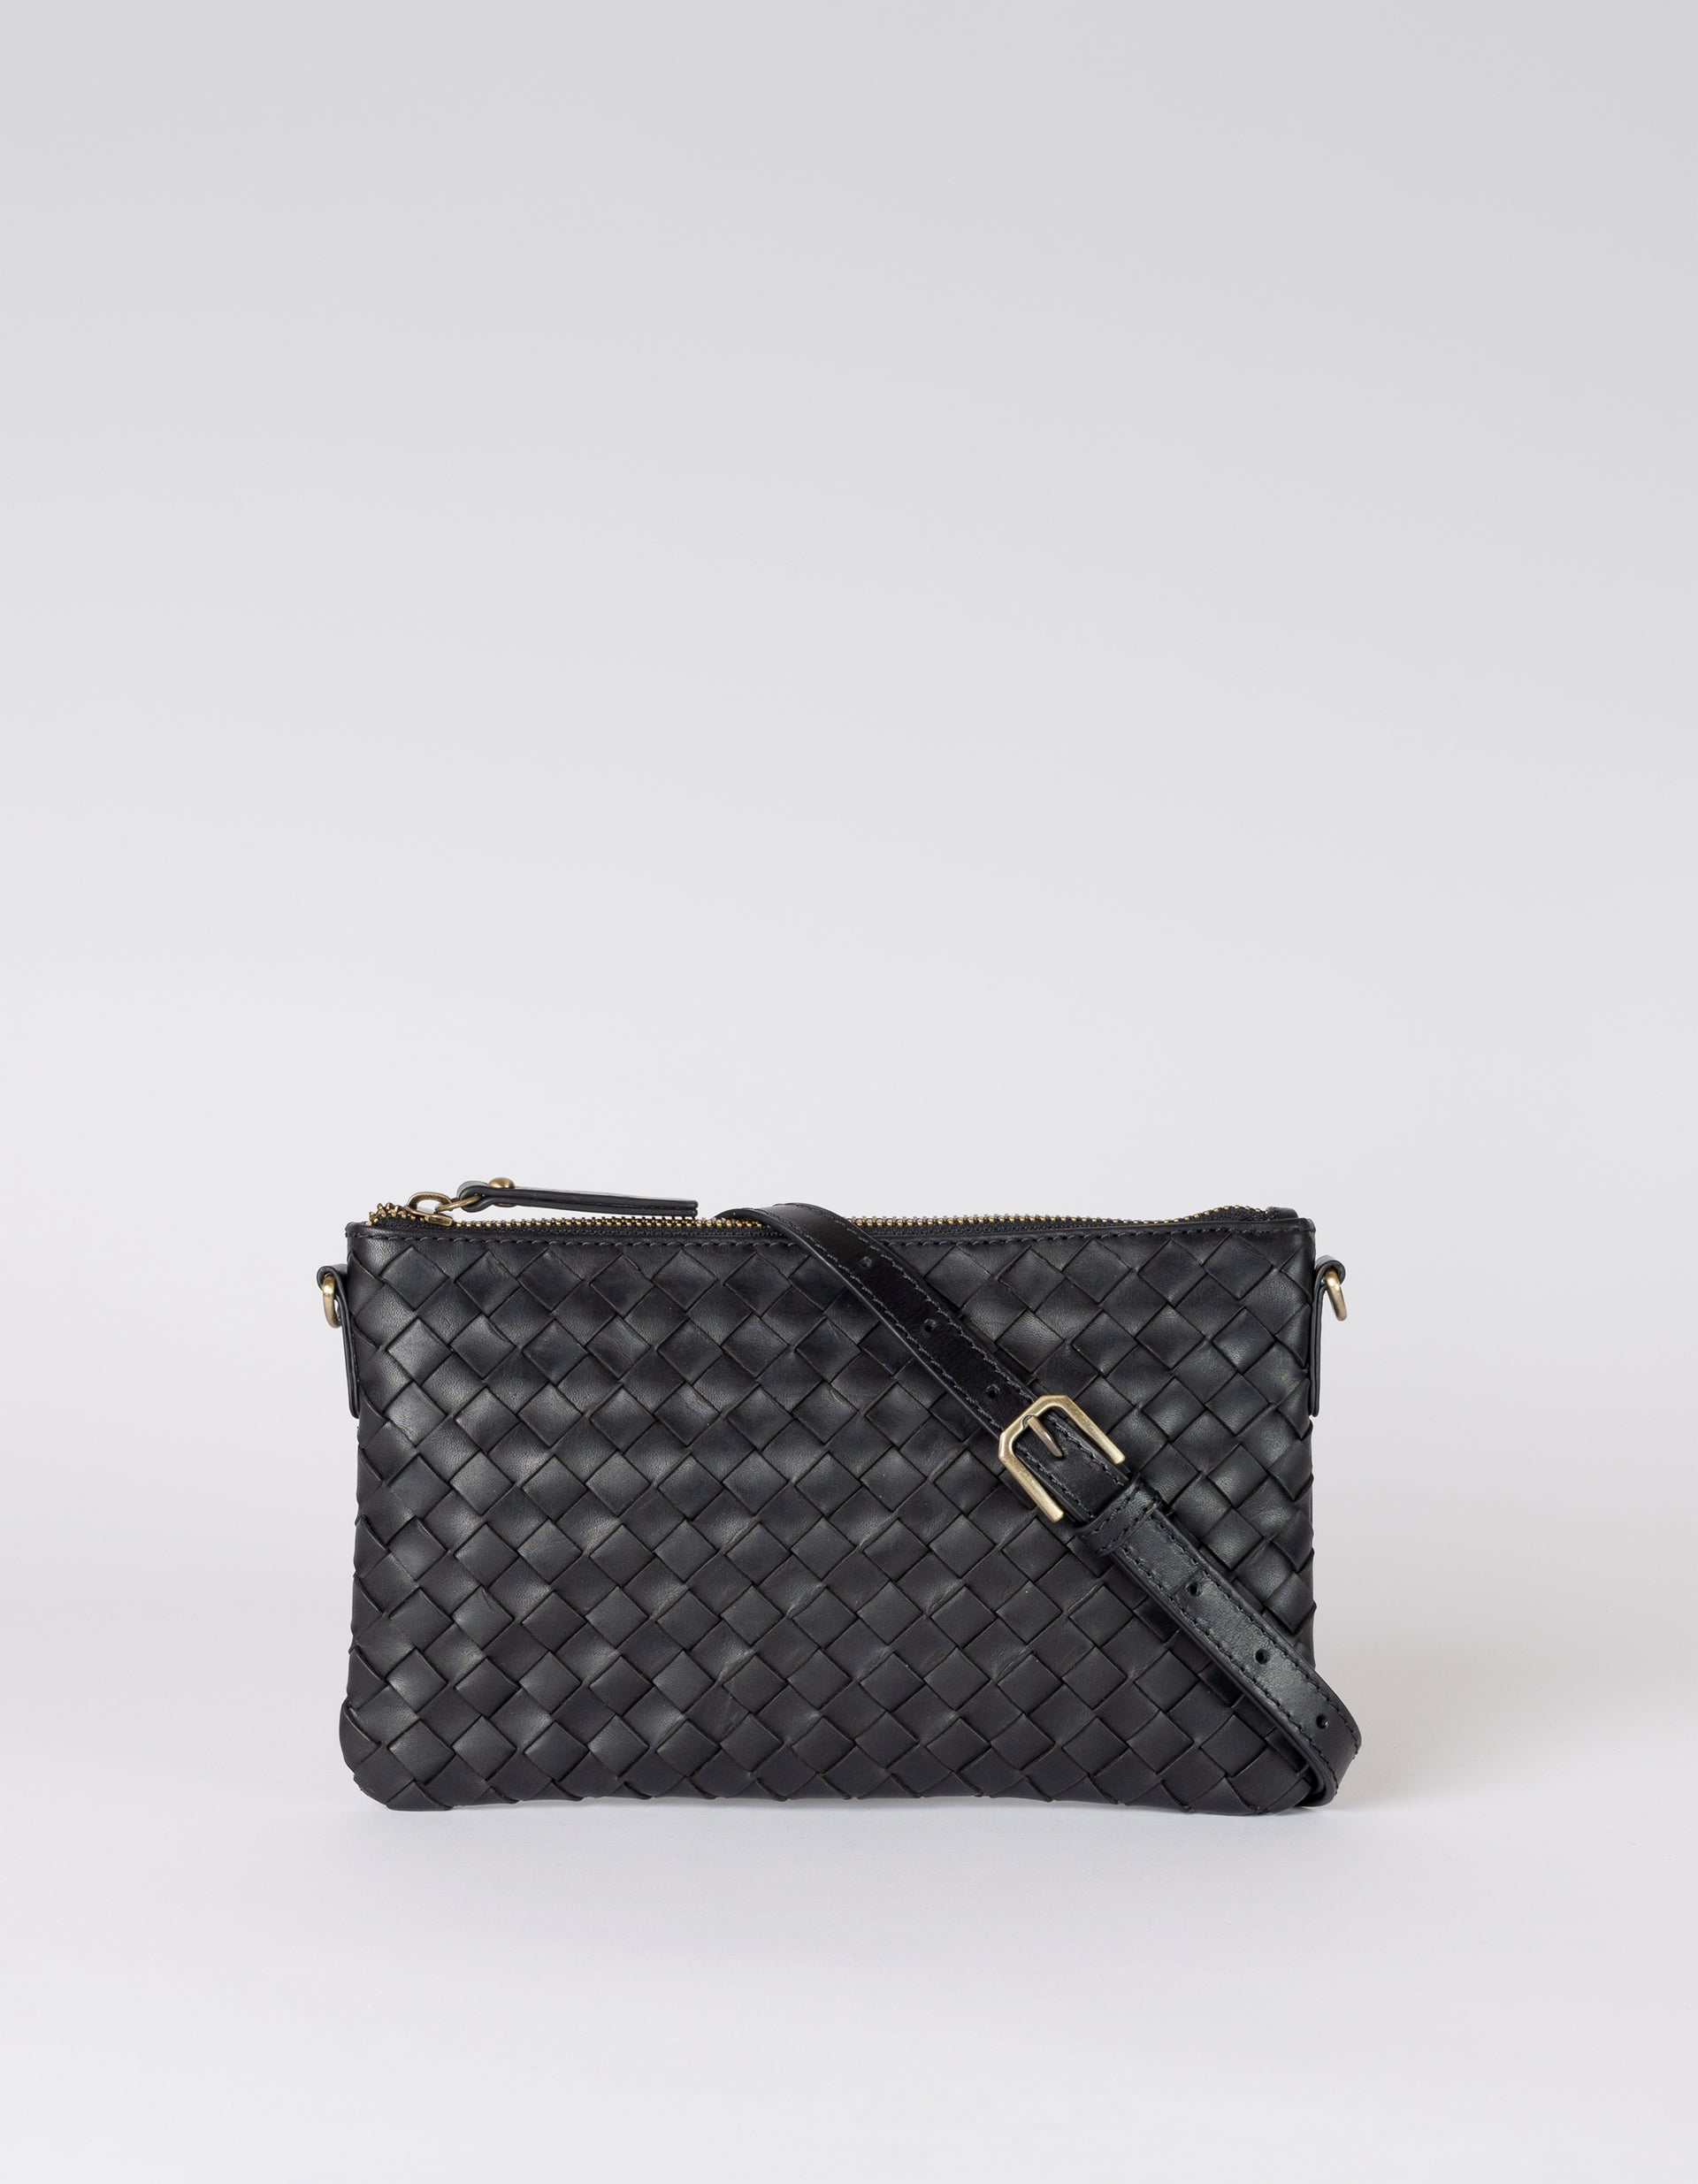 Lexi bag in black woven classic leather, front image with strap